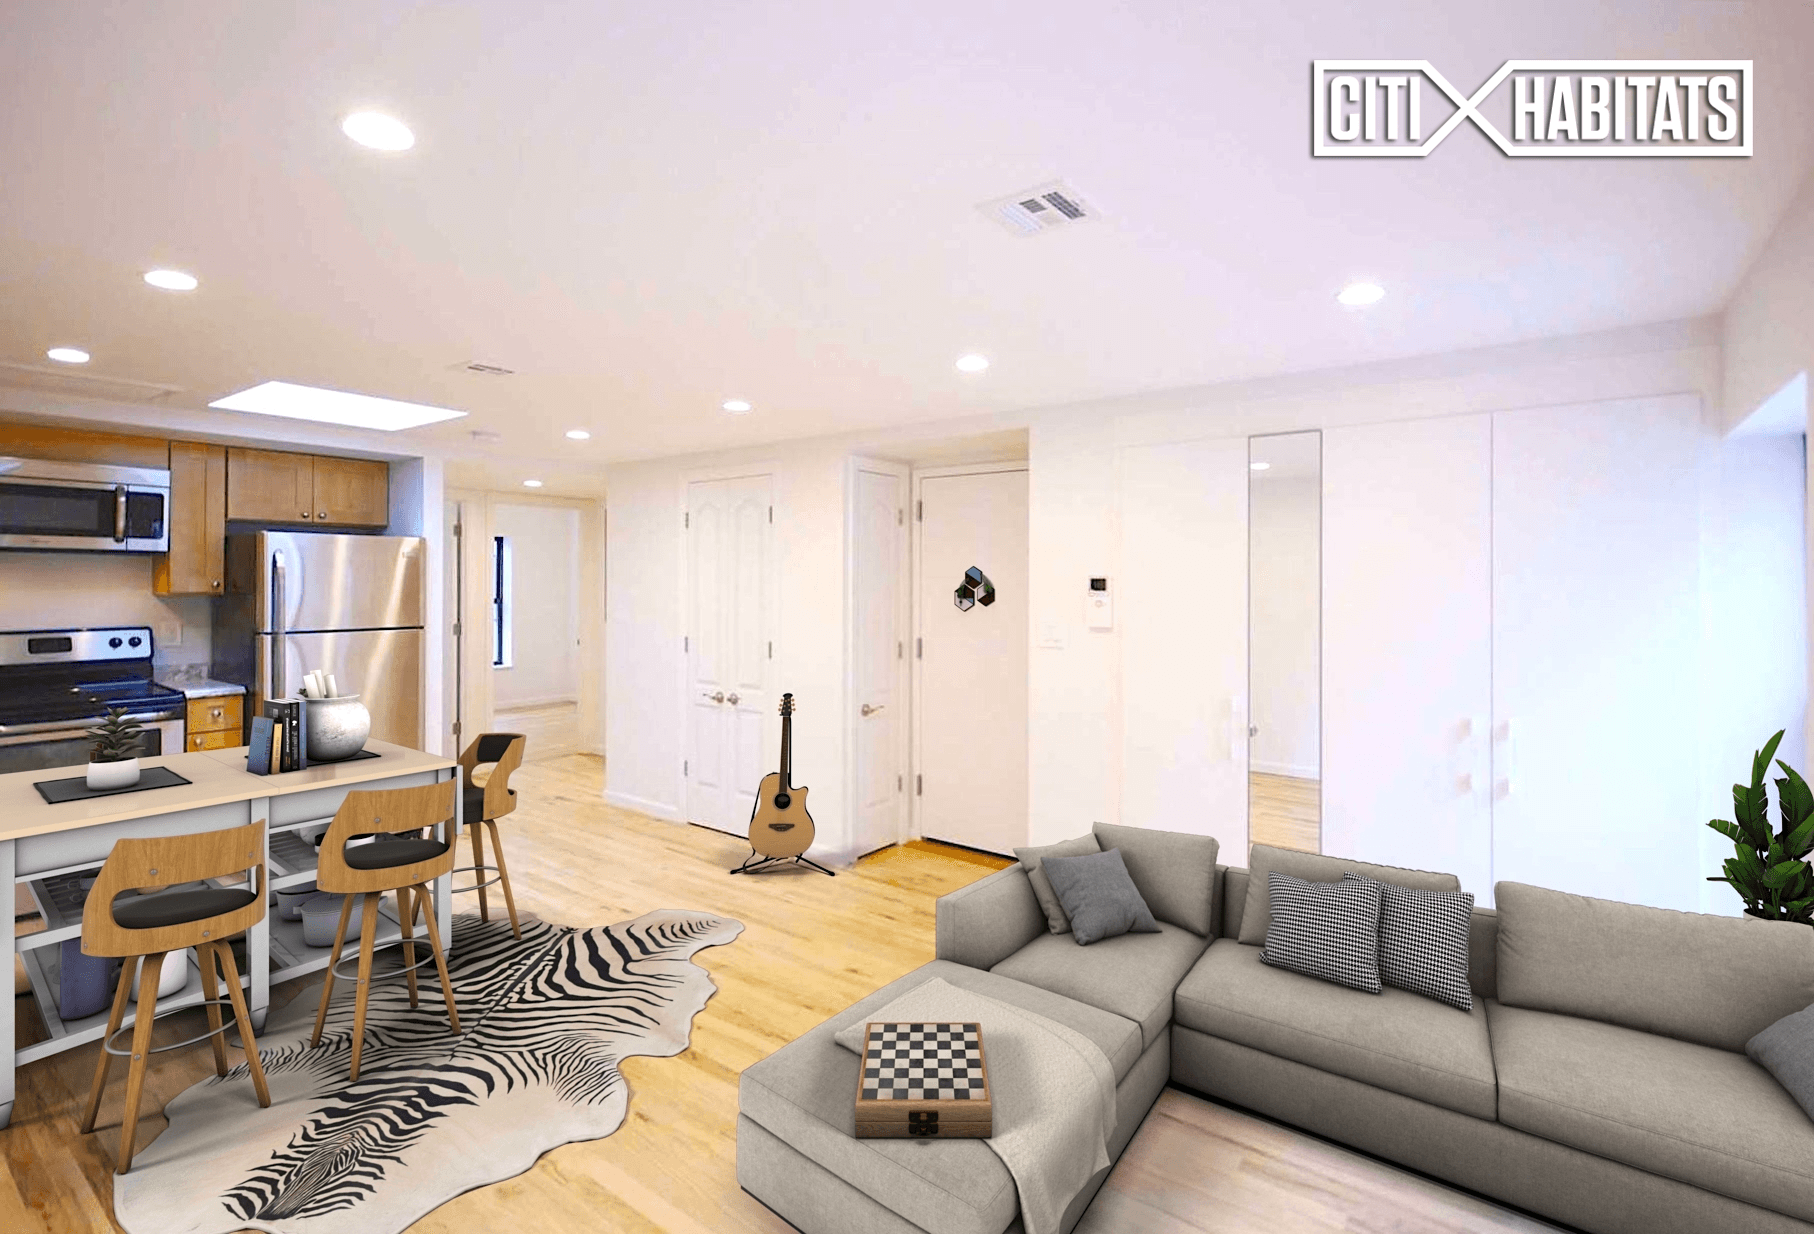 3 Mott Street, located on the meeting point of Civic Center, Chinatown and Tribeca has the perfect blend of Industrial amp ; residential features.